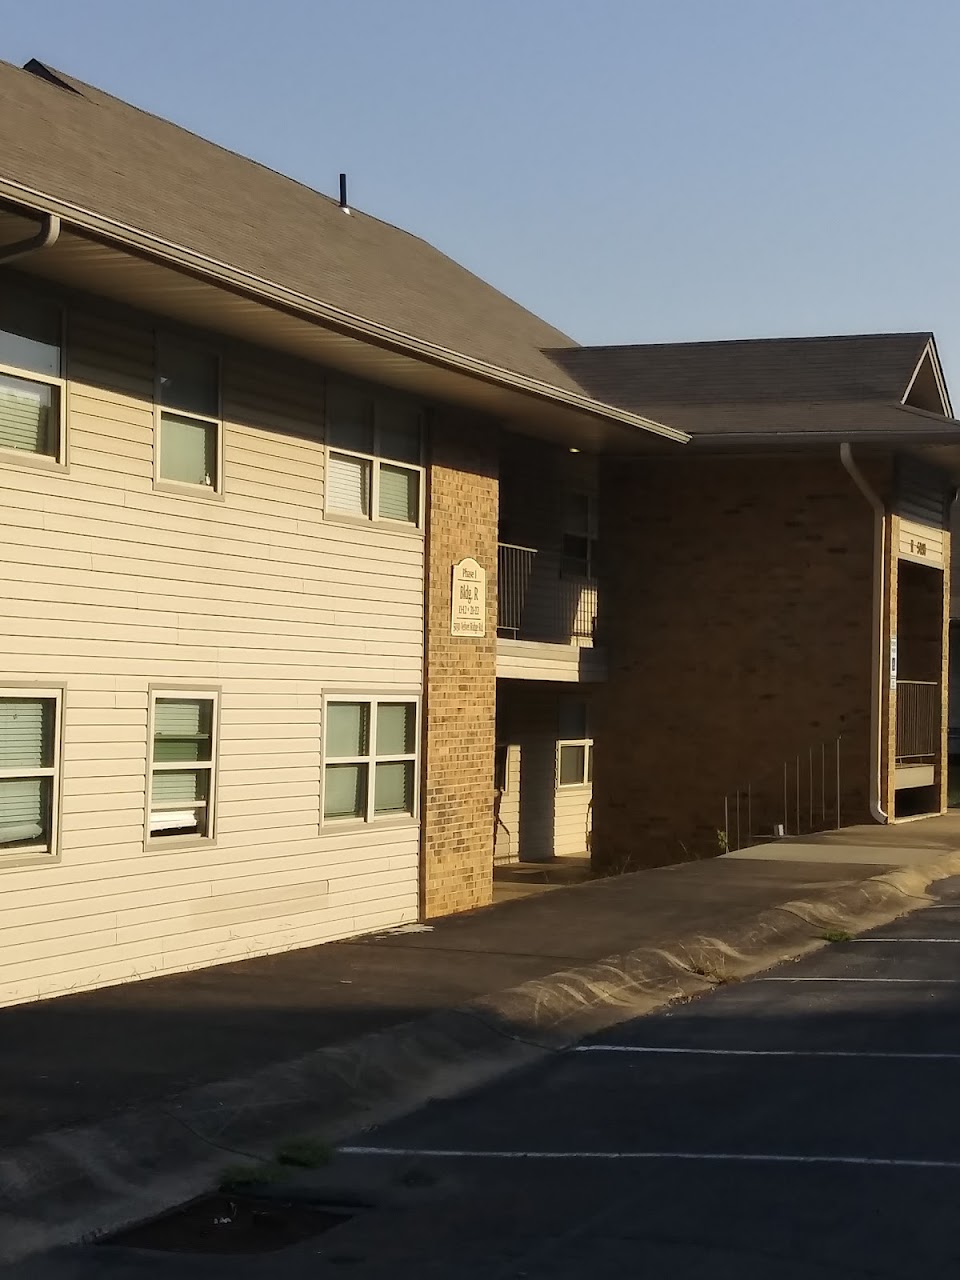 Photo of BLUFFS ON MCCAIN FKA RIDGECREST APARTMENTS. Affordable housing located at 431 MCCAIN BLVD NORTH LITTLE ROCK, AR 72116.0